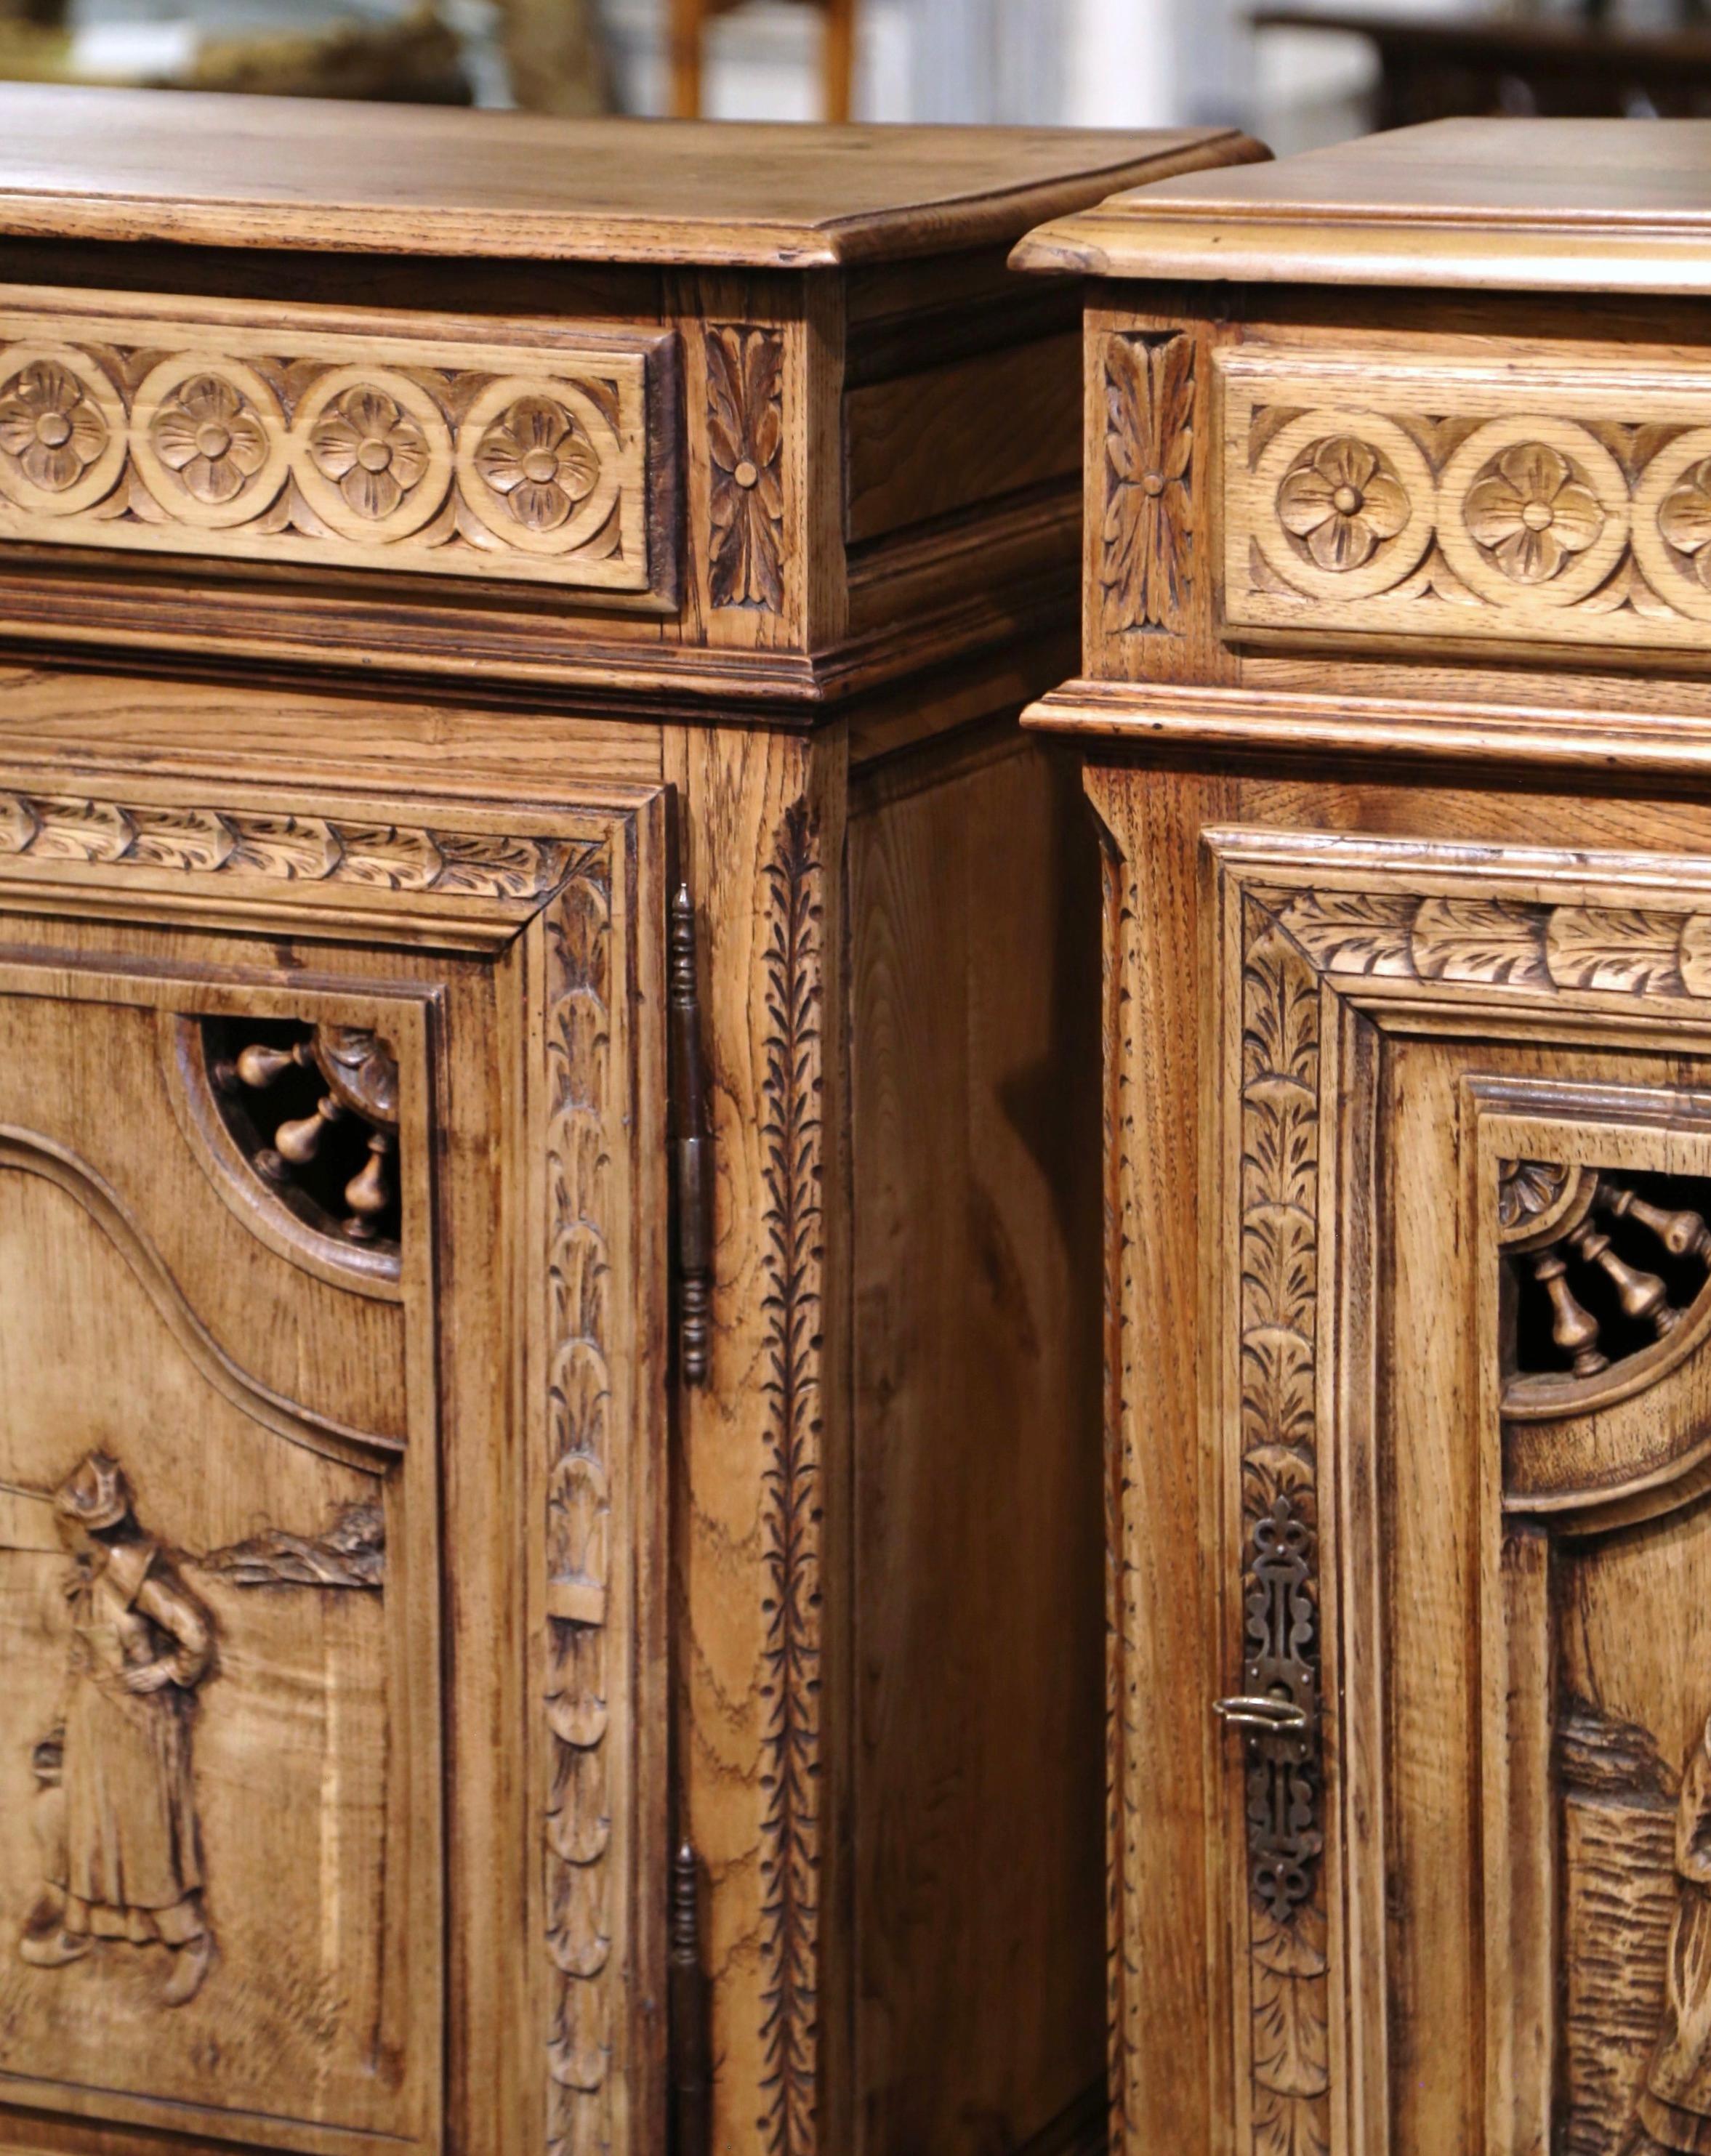  19th Century French Carved Bleached Oak Cabinets from Brittany, Set of Two For Sale 1